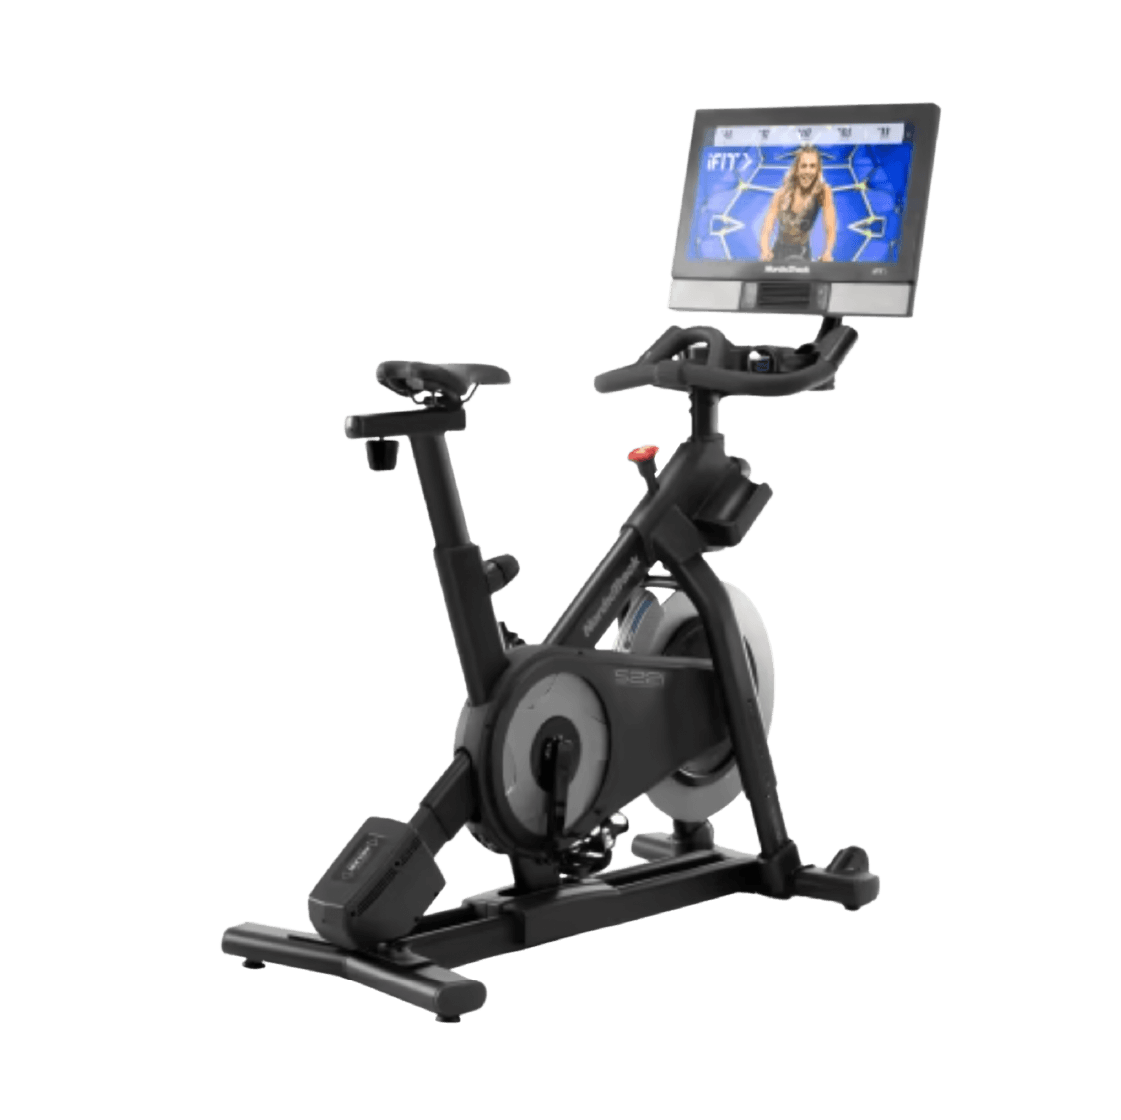 Compare freebeat bikes with Nordic Track S22i Studio Bike. Immersive cardio and artist generated interactive virtual workout stages. The most connected home exercise bike. Cycling, strength training, cardio, and more, experience Lit Bike is features